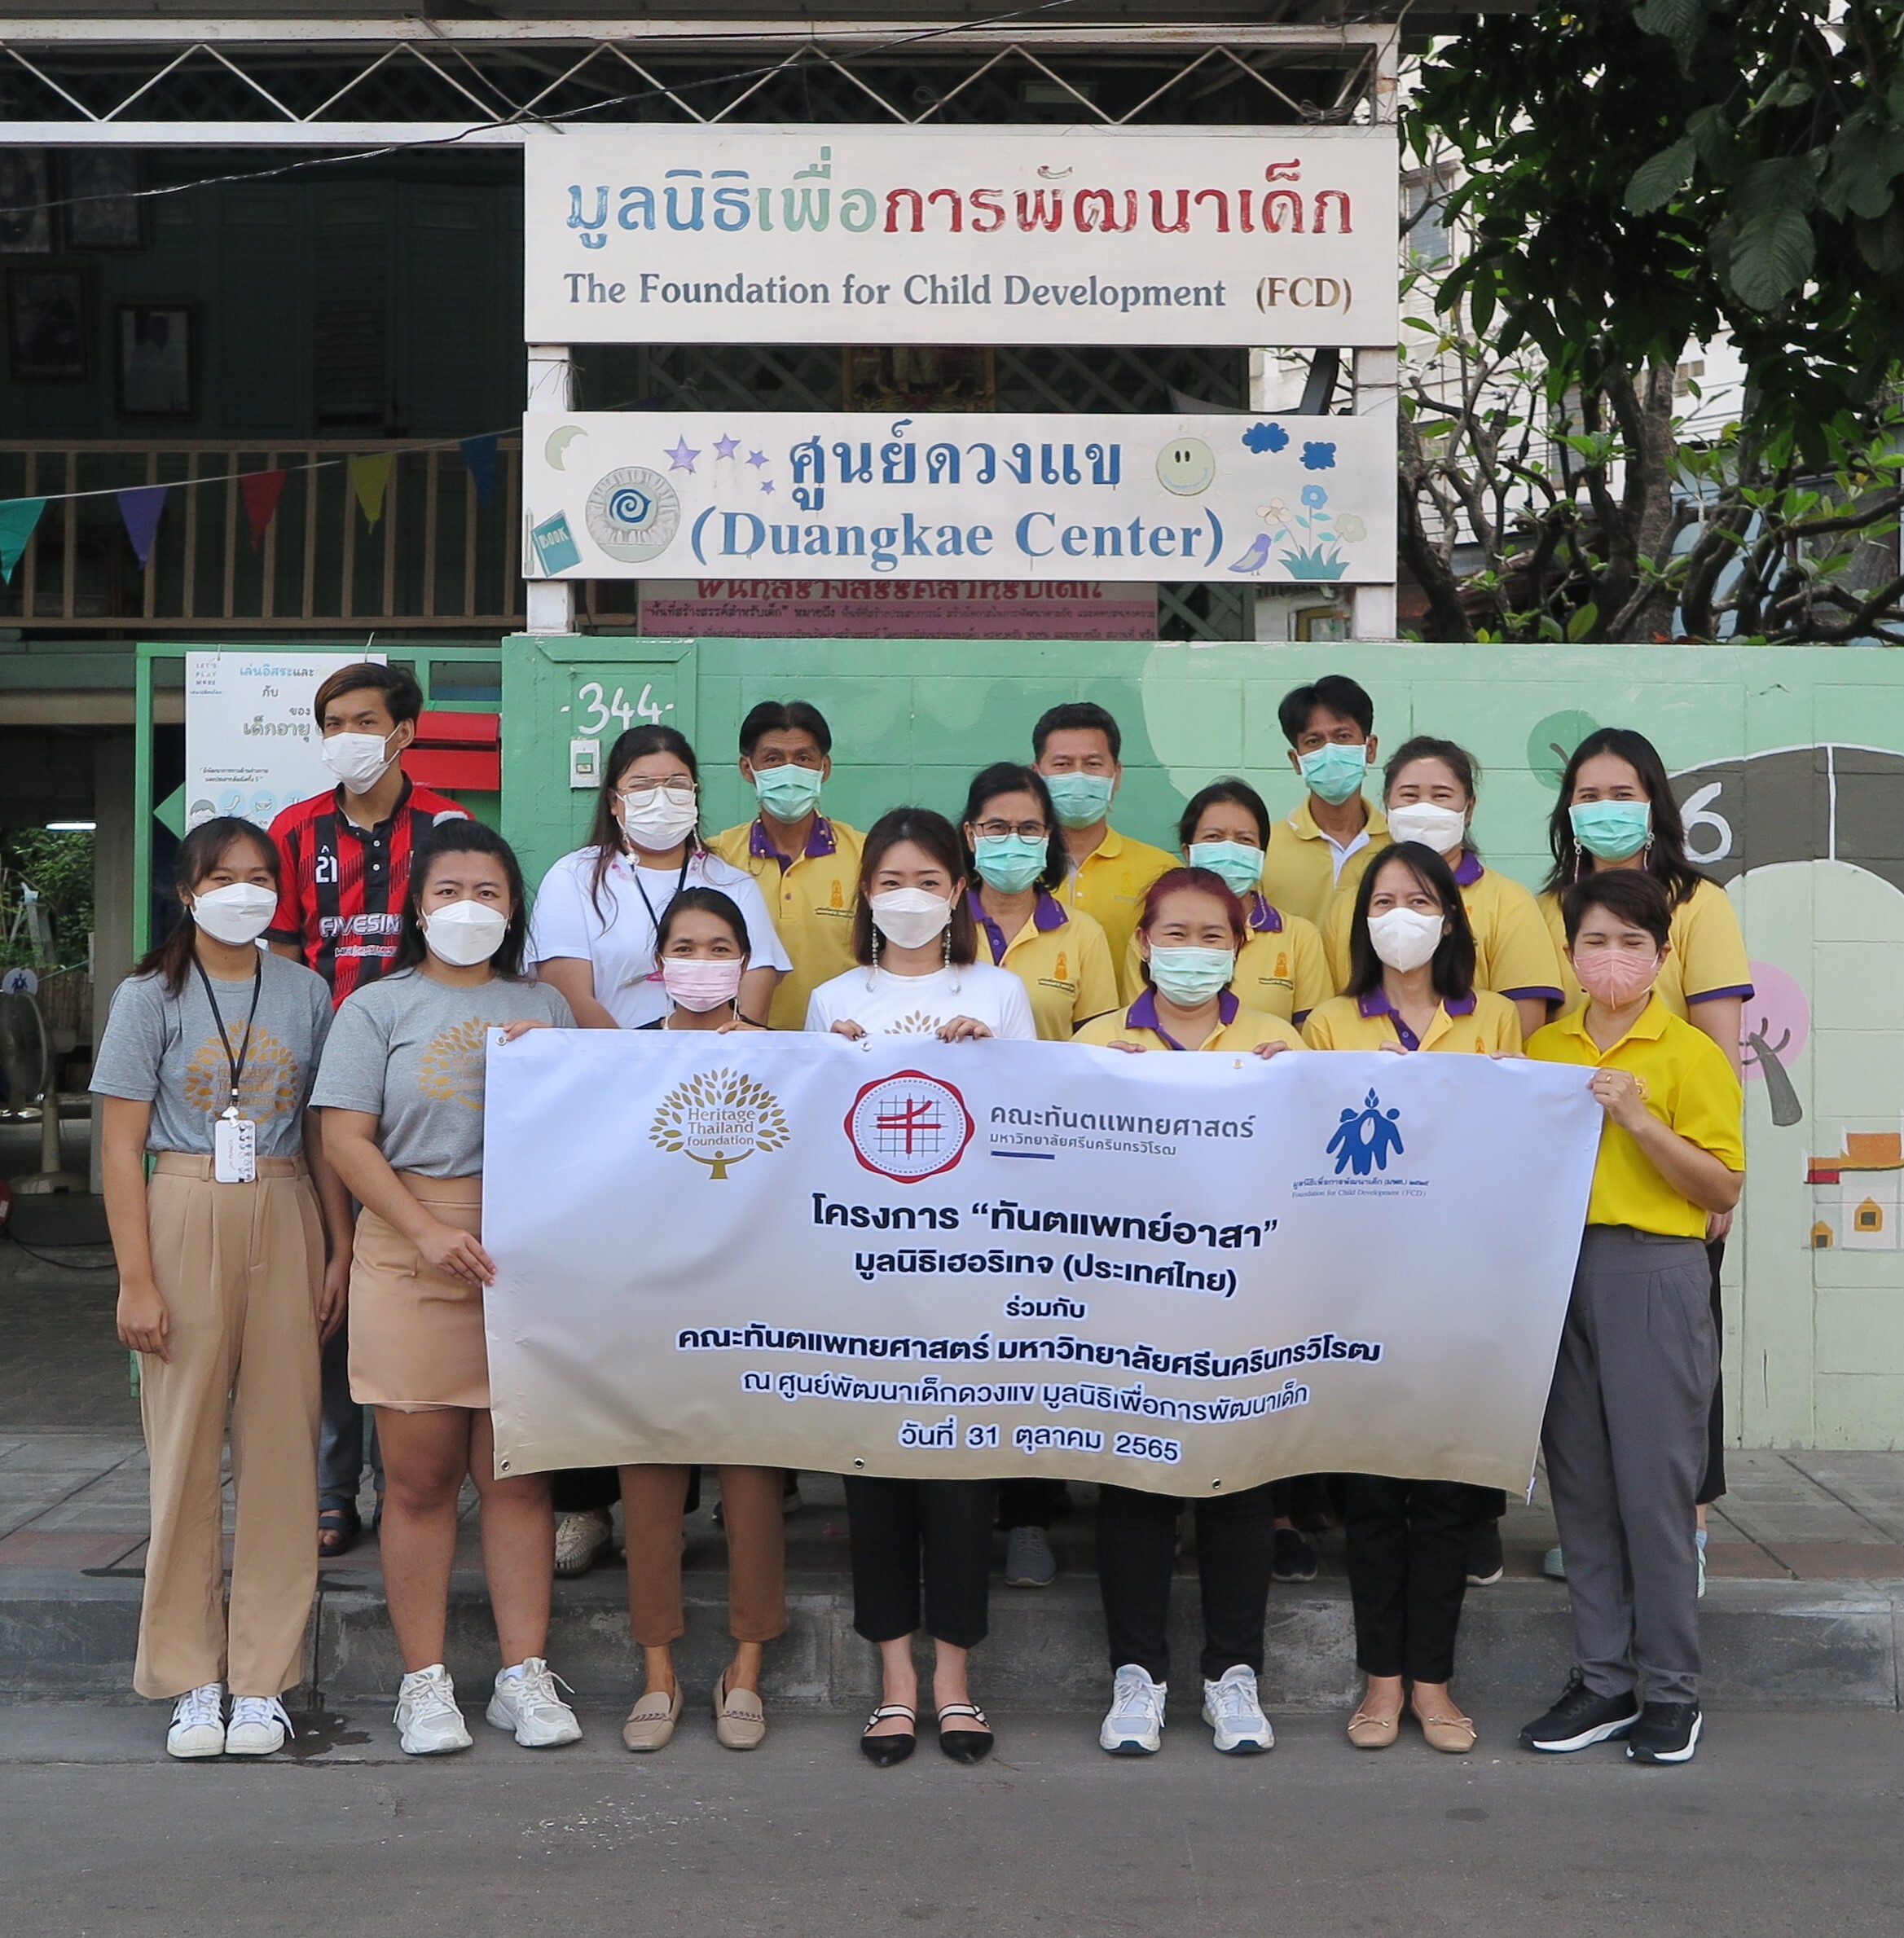 Heritage Thailand Foundation with Srinakharinwirot University Brings "Dentist Volunteer" Campaign to The Foundation for Child Development at Duangkae Center